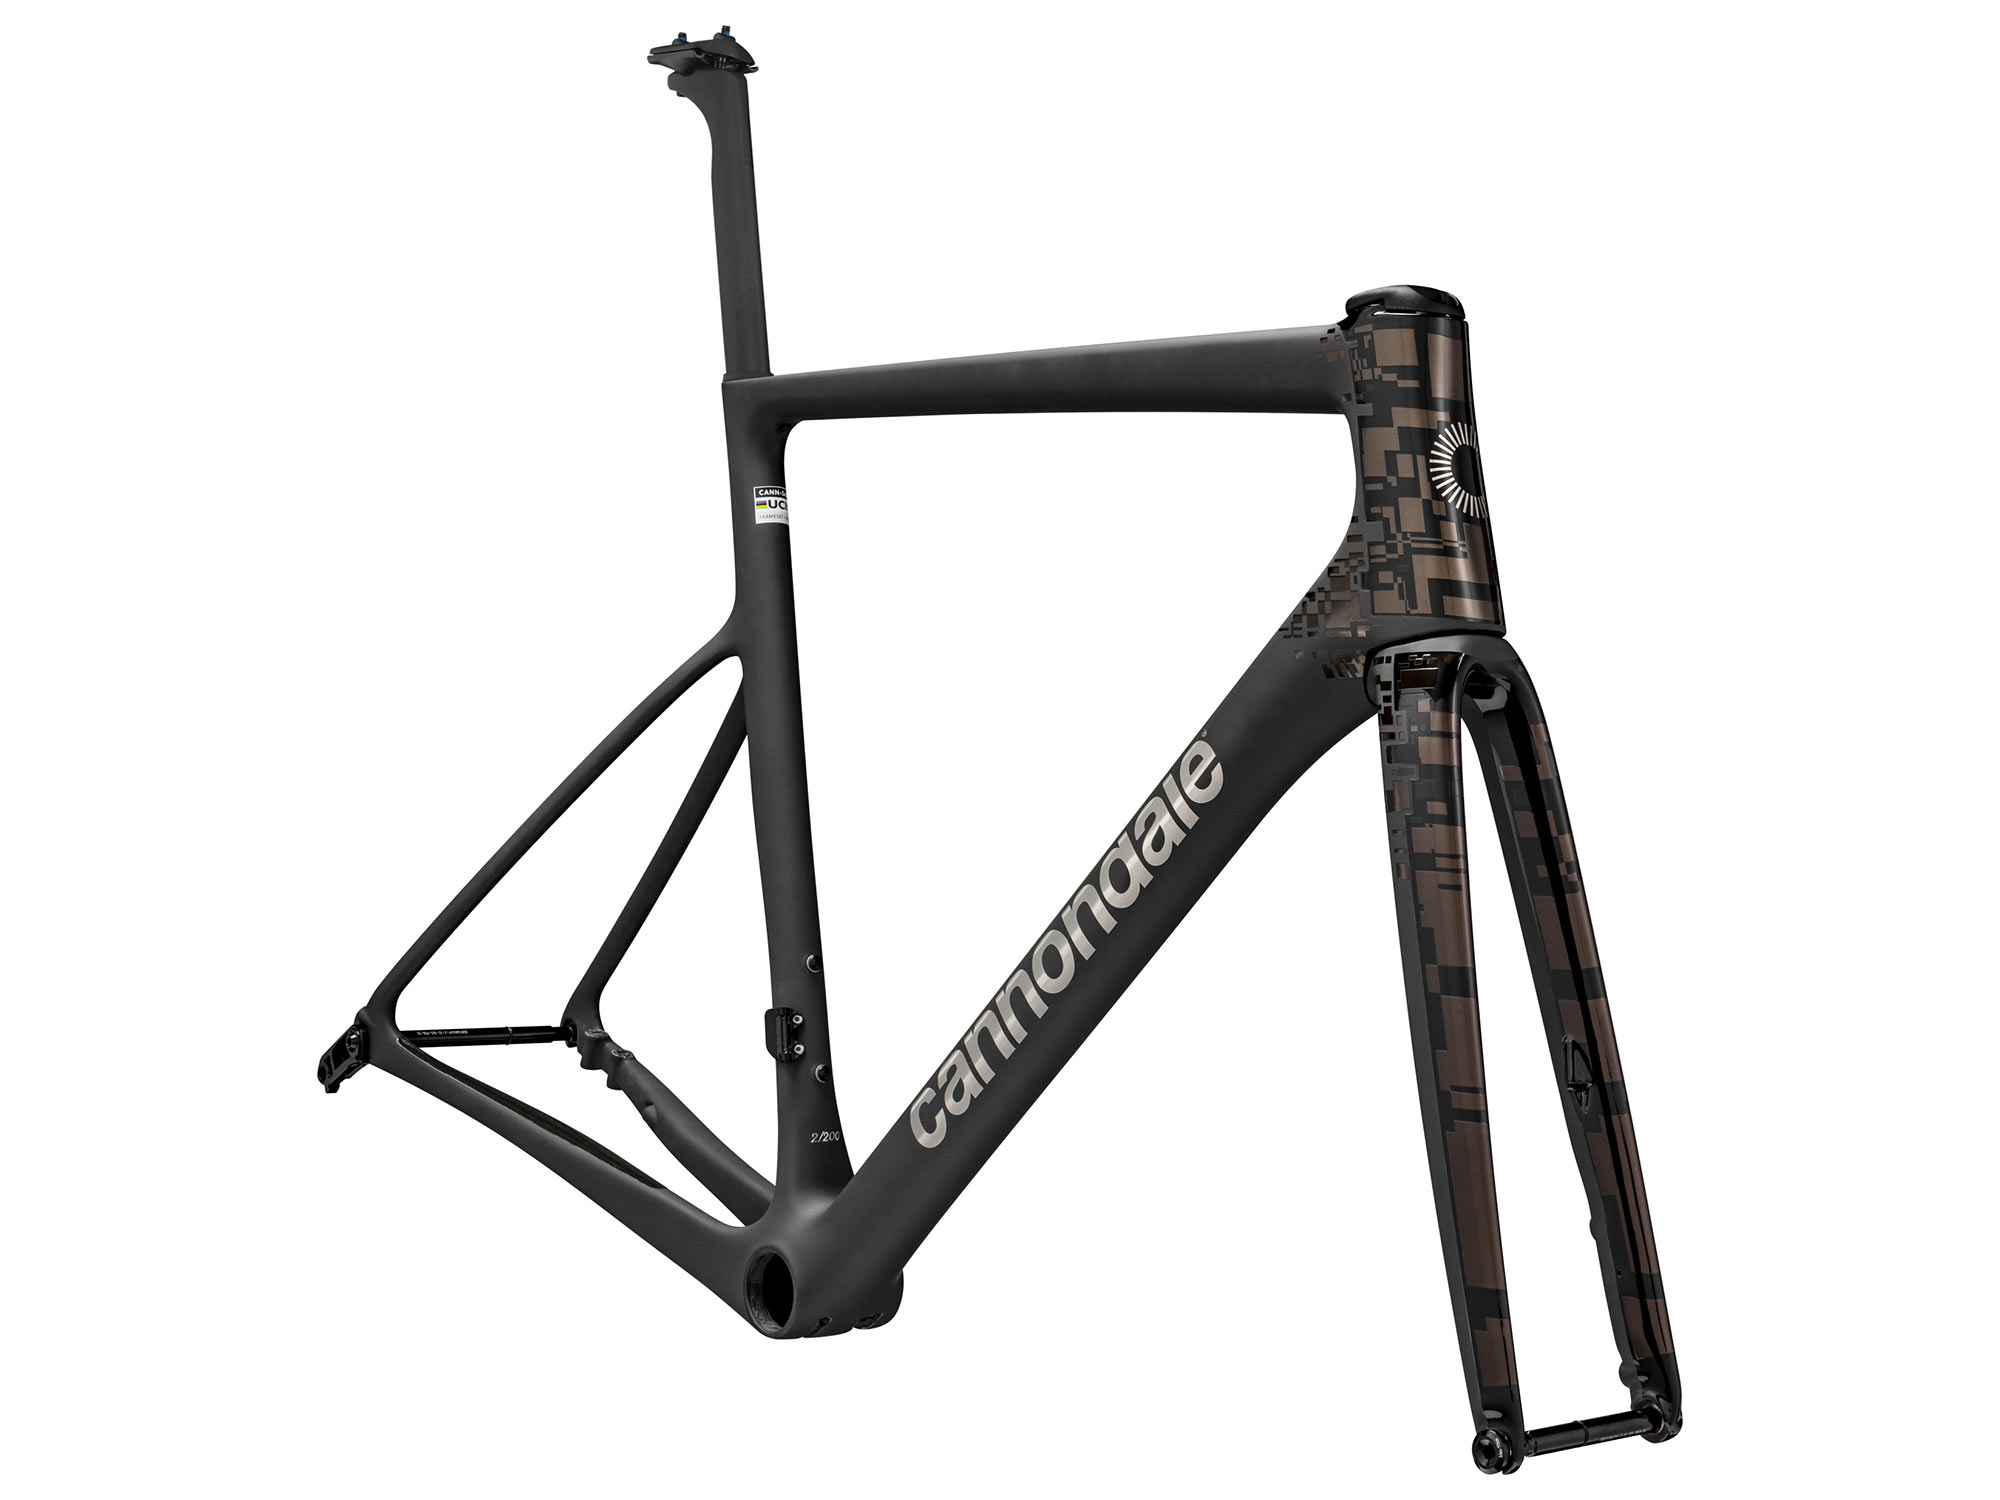 Cannondale-SuperSix-EVO-Leichtbau-LTD_limited-edition-ultra-lightweight-carbon-road-bike_angled-front.jpg